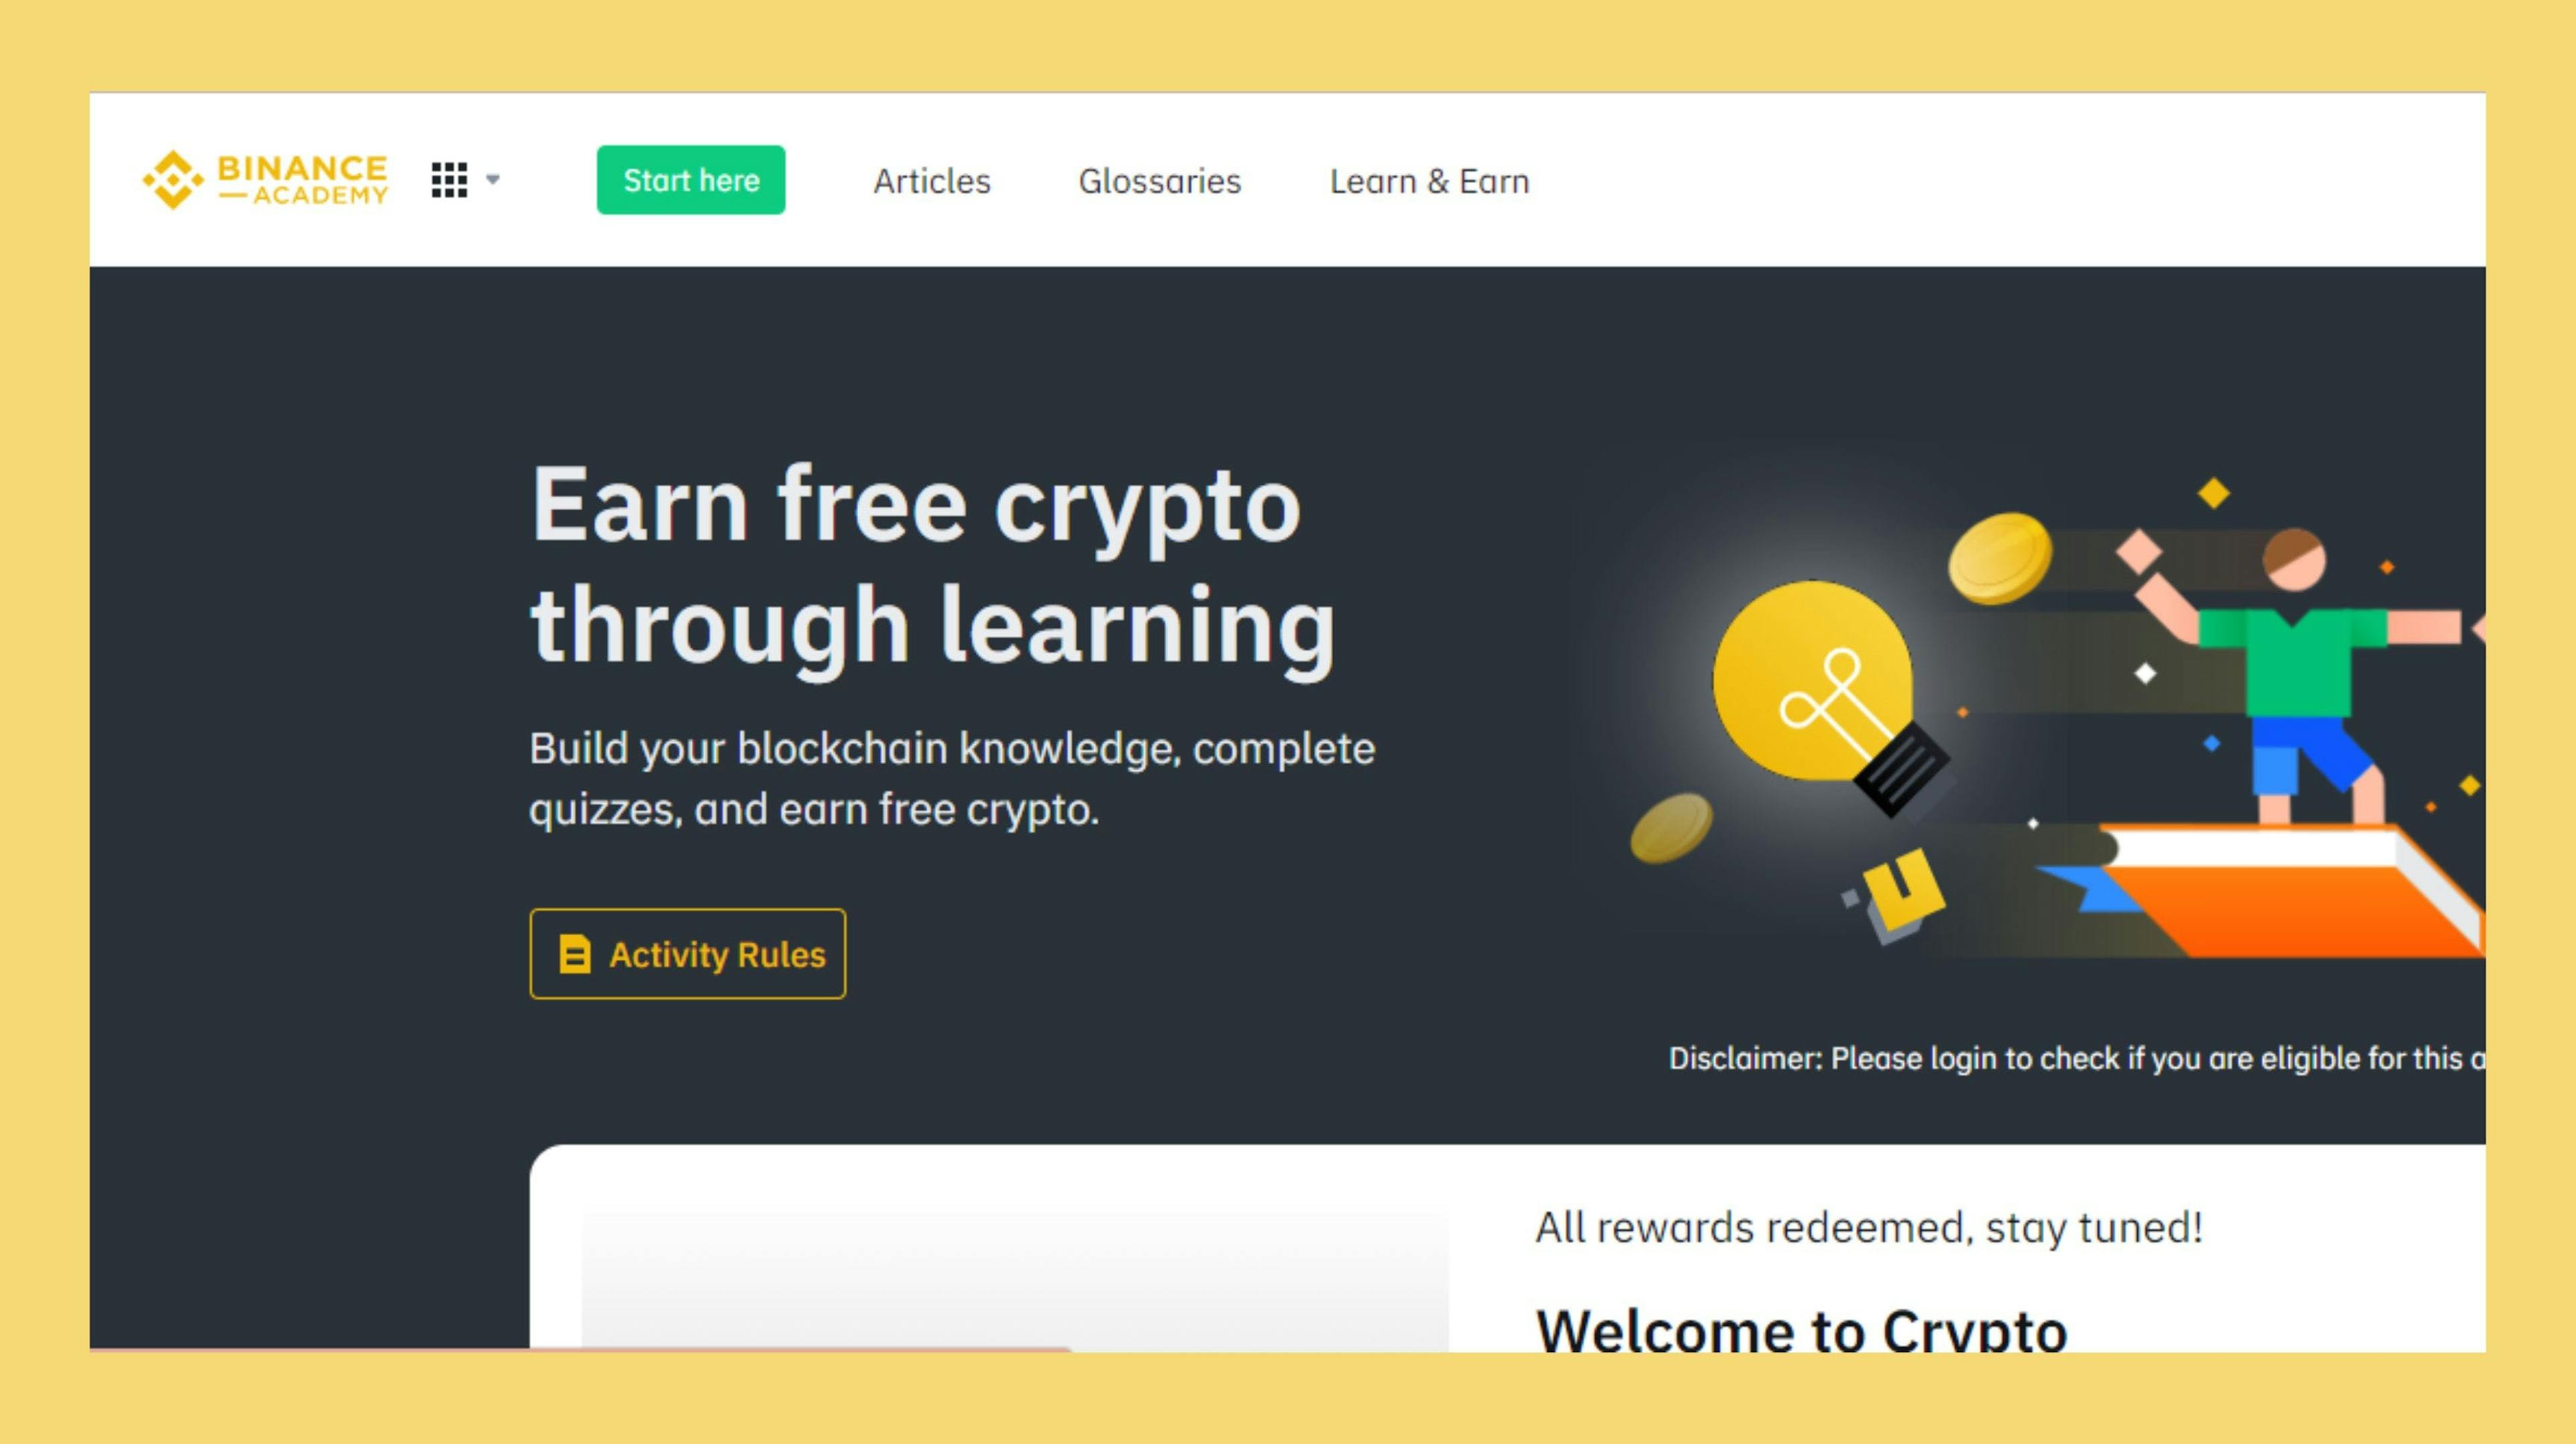 Earn free crypto through learning from Binance